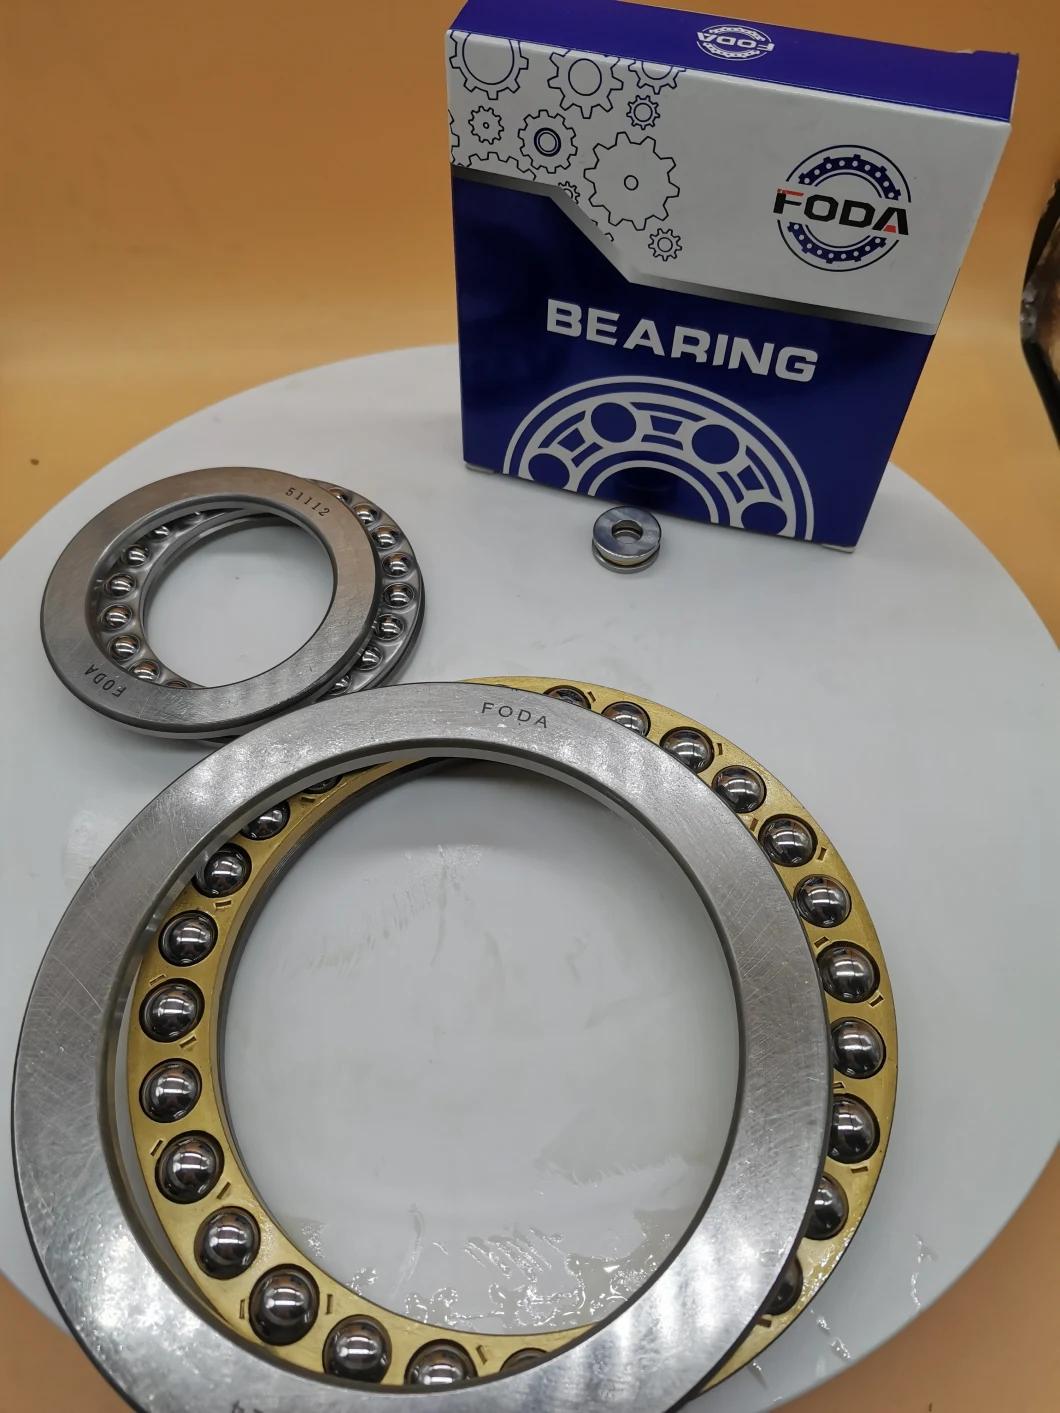 Unidirectional Thrust Ball Bearings/Low Speed Reducer/Foda High Quality Bearings Instead of Koyo Bearings/Thrust Ball Bearings of 51407